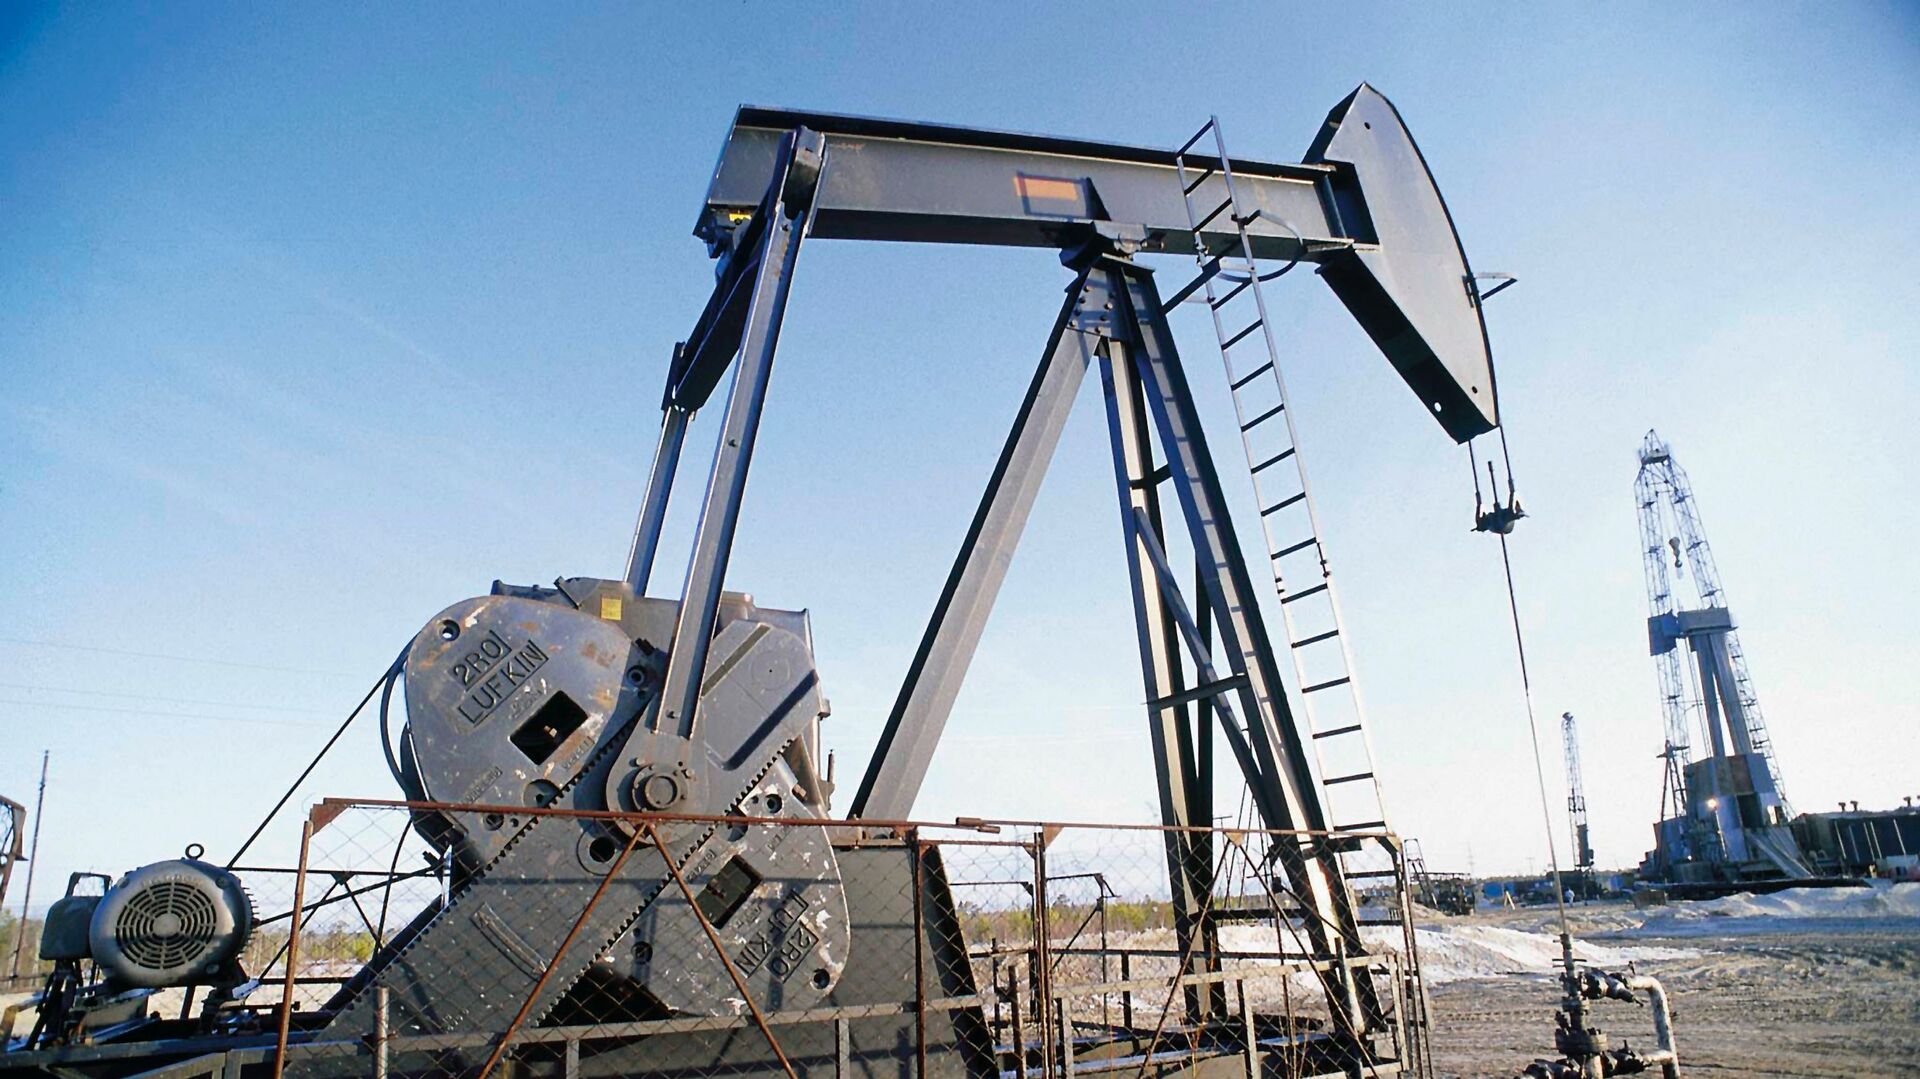 The prices of West Texas Intermediate (WTI), the US oil benchmark, and Brent crude, the global oil benchmark, hit record lows not seen since April 2009 on Tuesday. - Sputnik Азербайджан, 1920, 03.02.2023